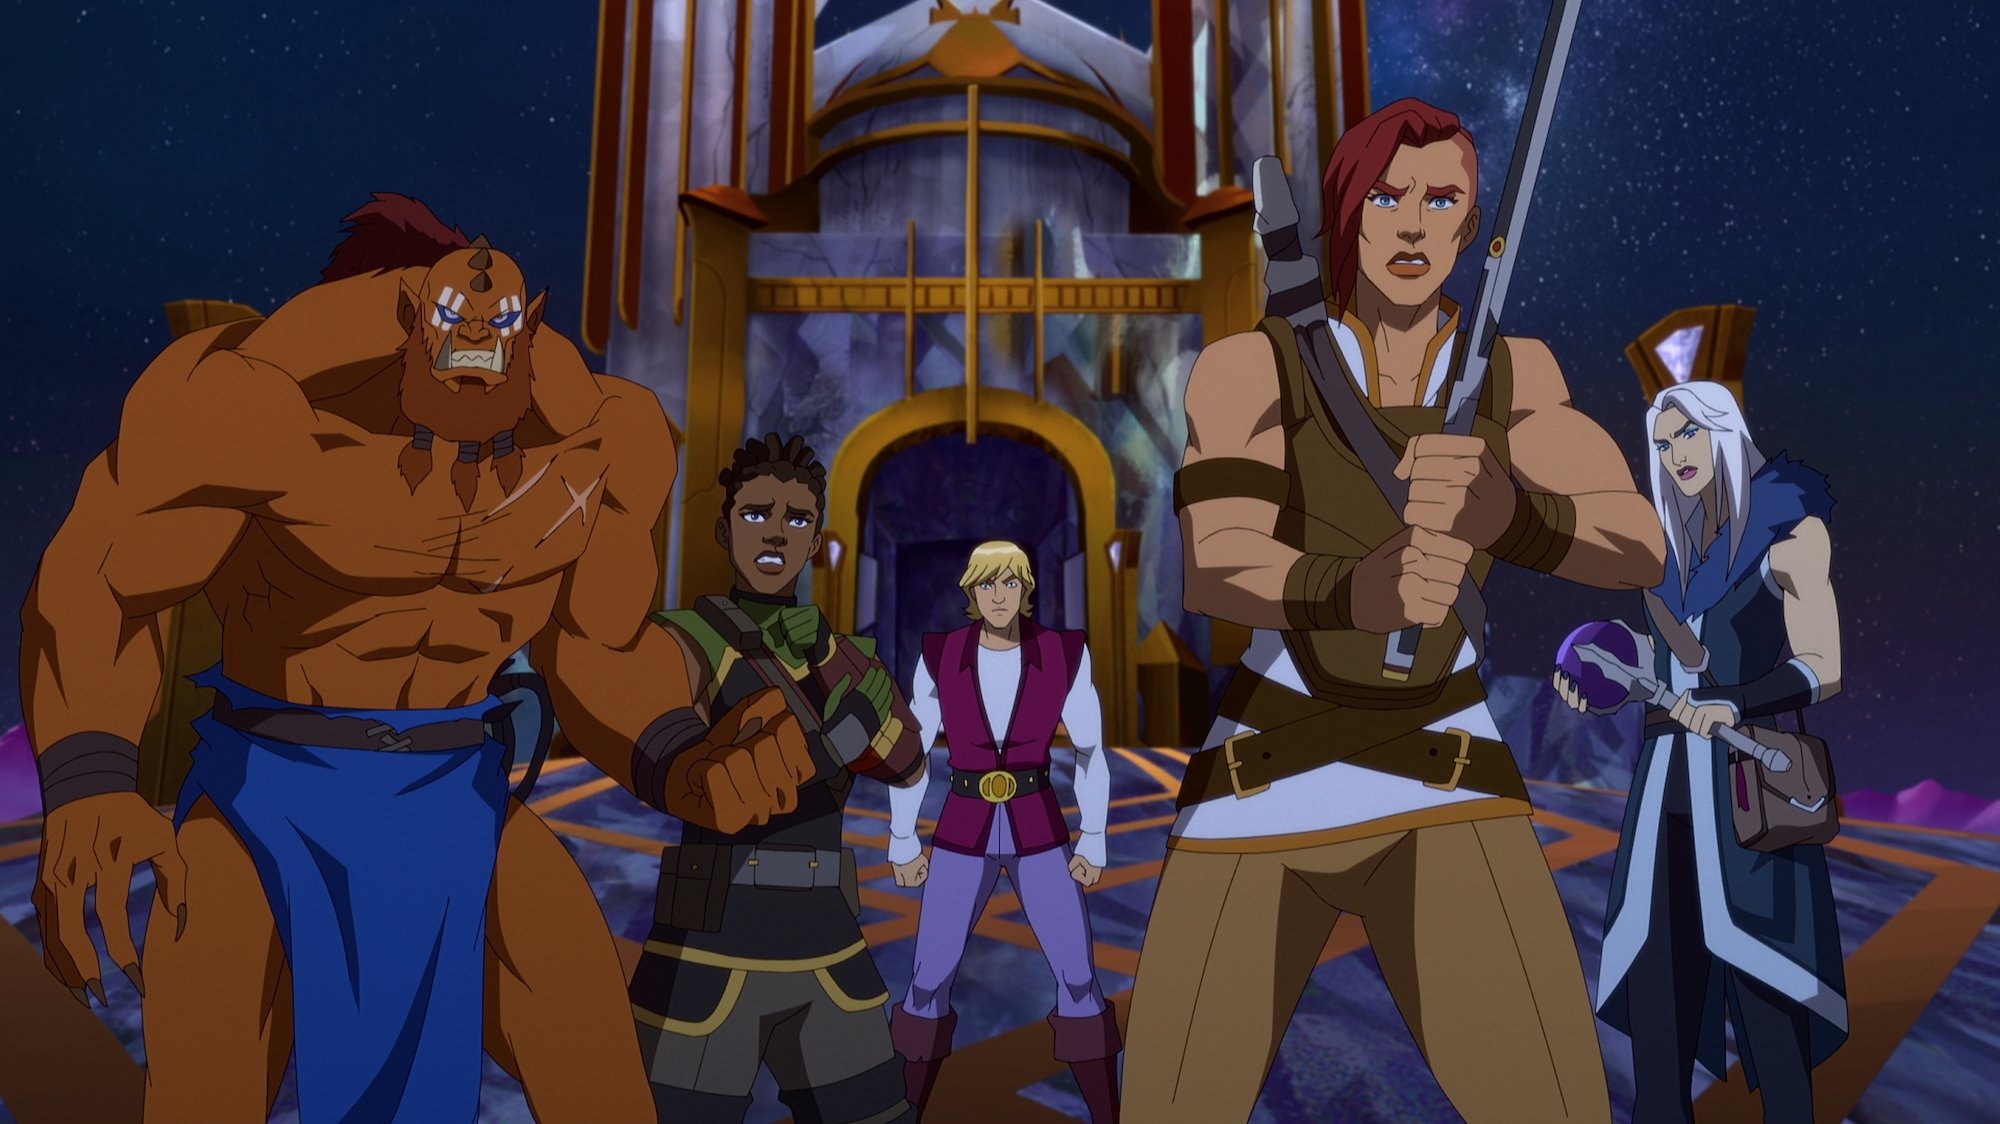 Masters of the Universe: Revelation -- Beast Man, Andra, Prince Adam, Teela and Evil-Lyn prepare for battle